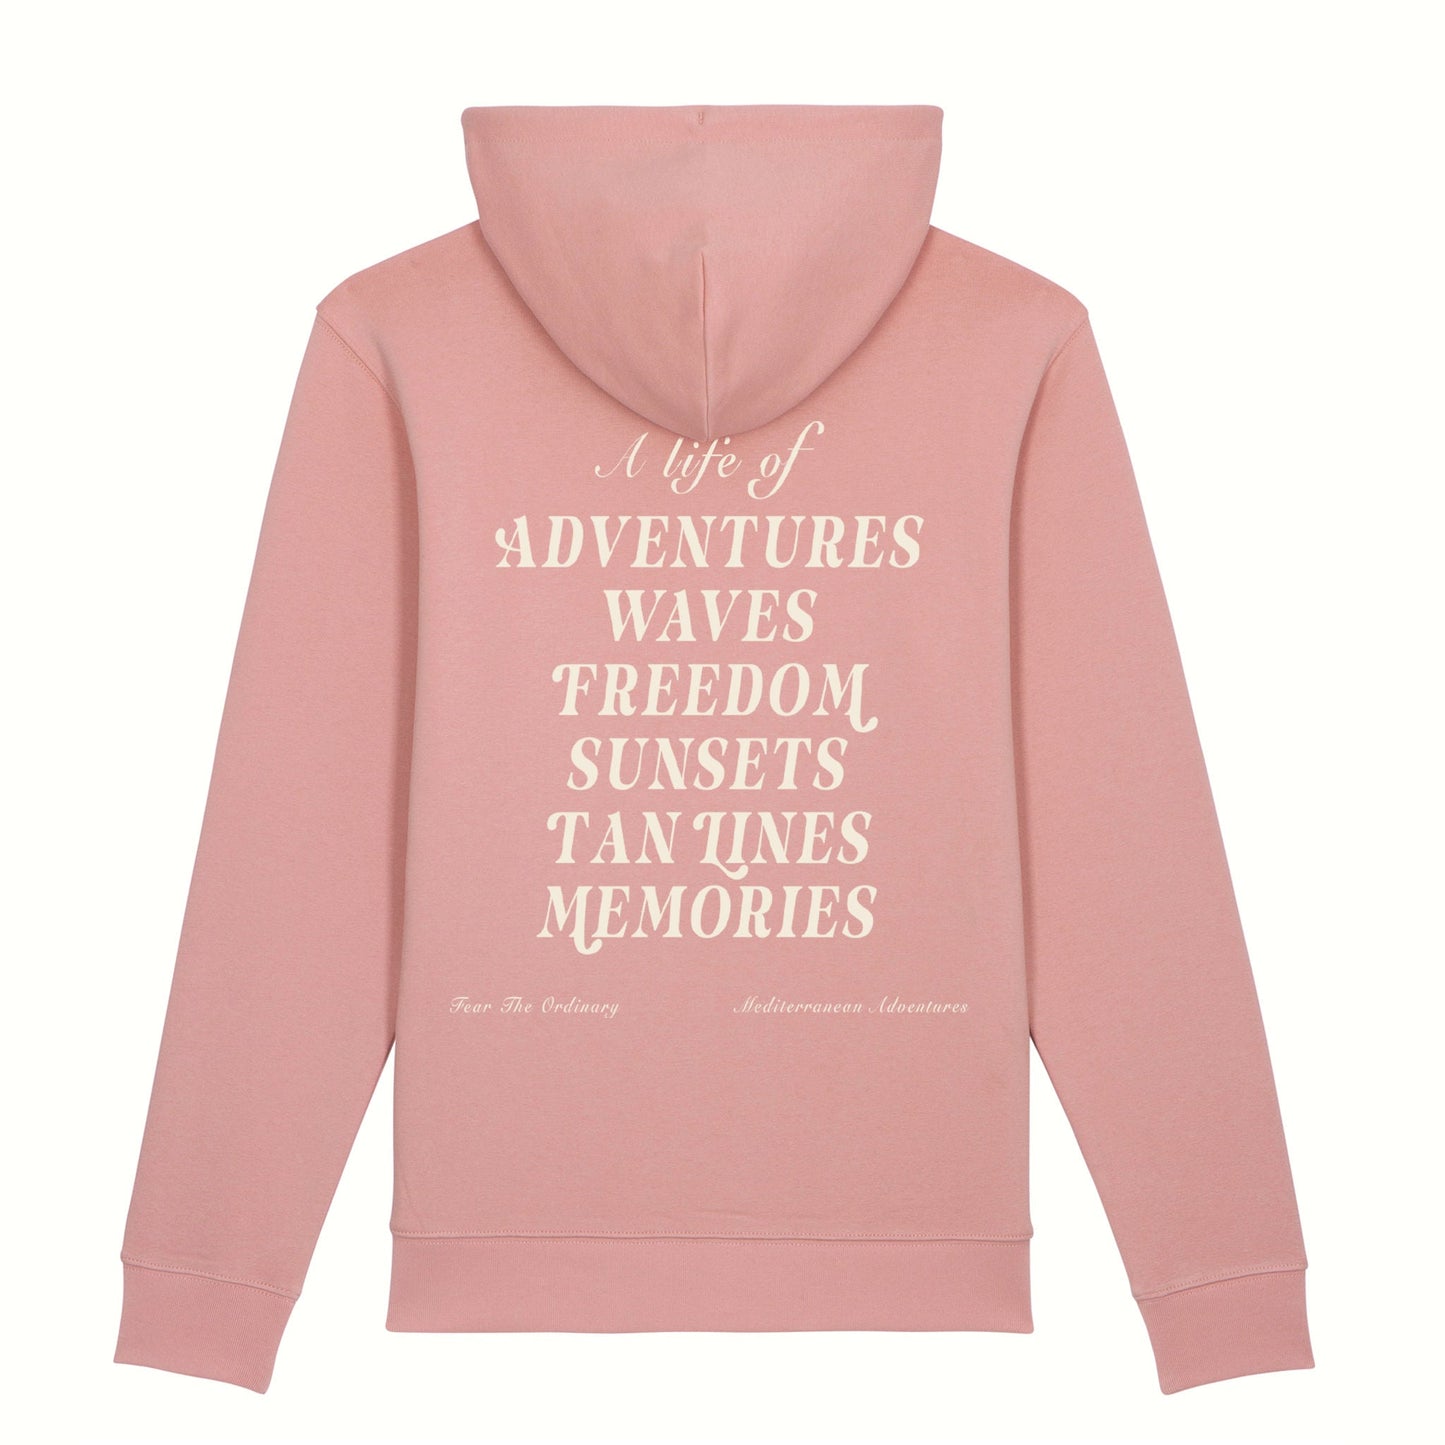 Fear the ordinary pastel pink premium organic cotton hoodie with cream adventure inspired back print.